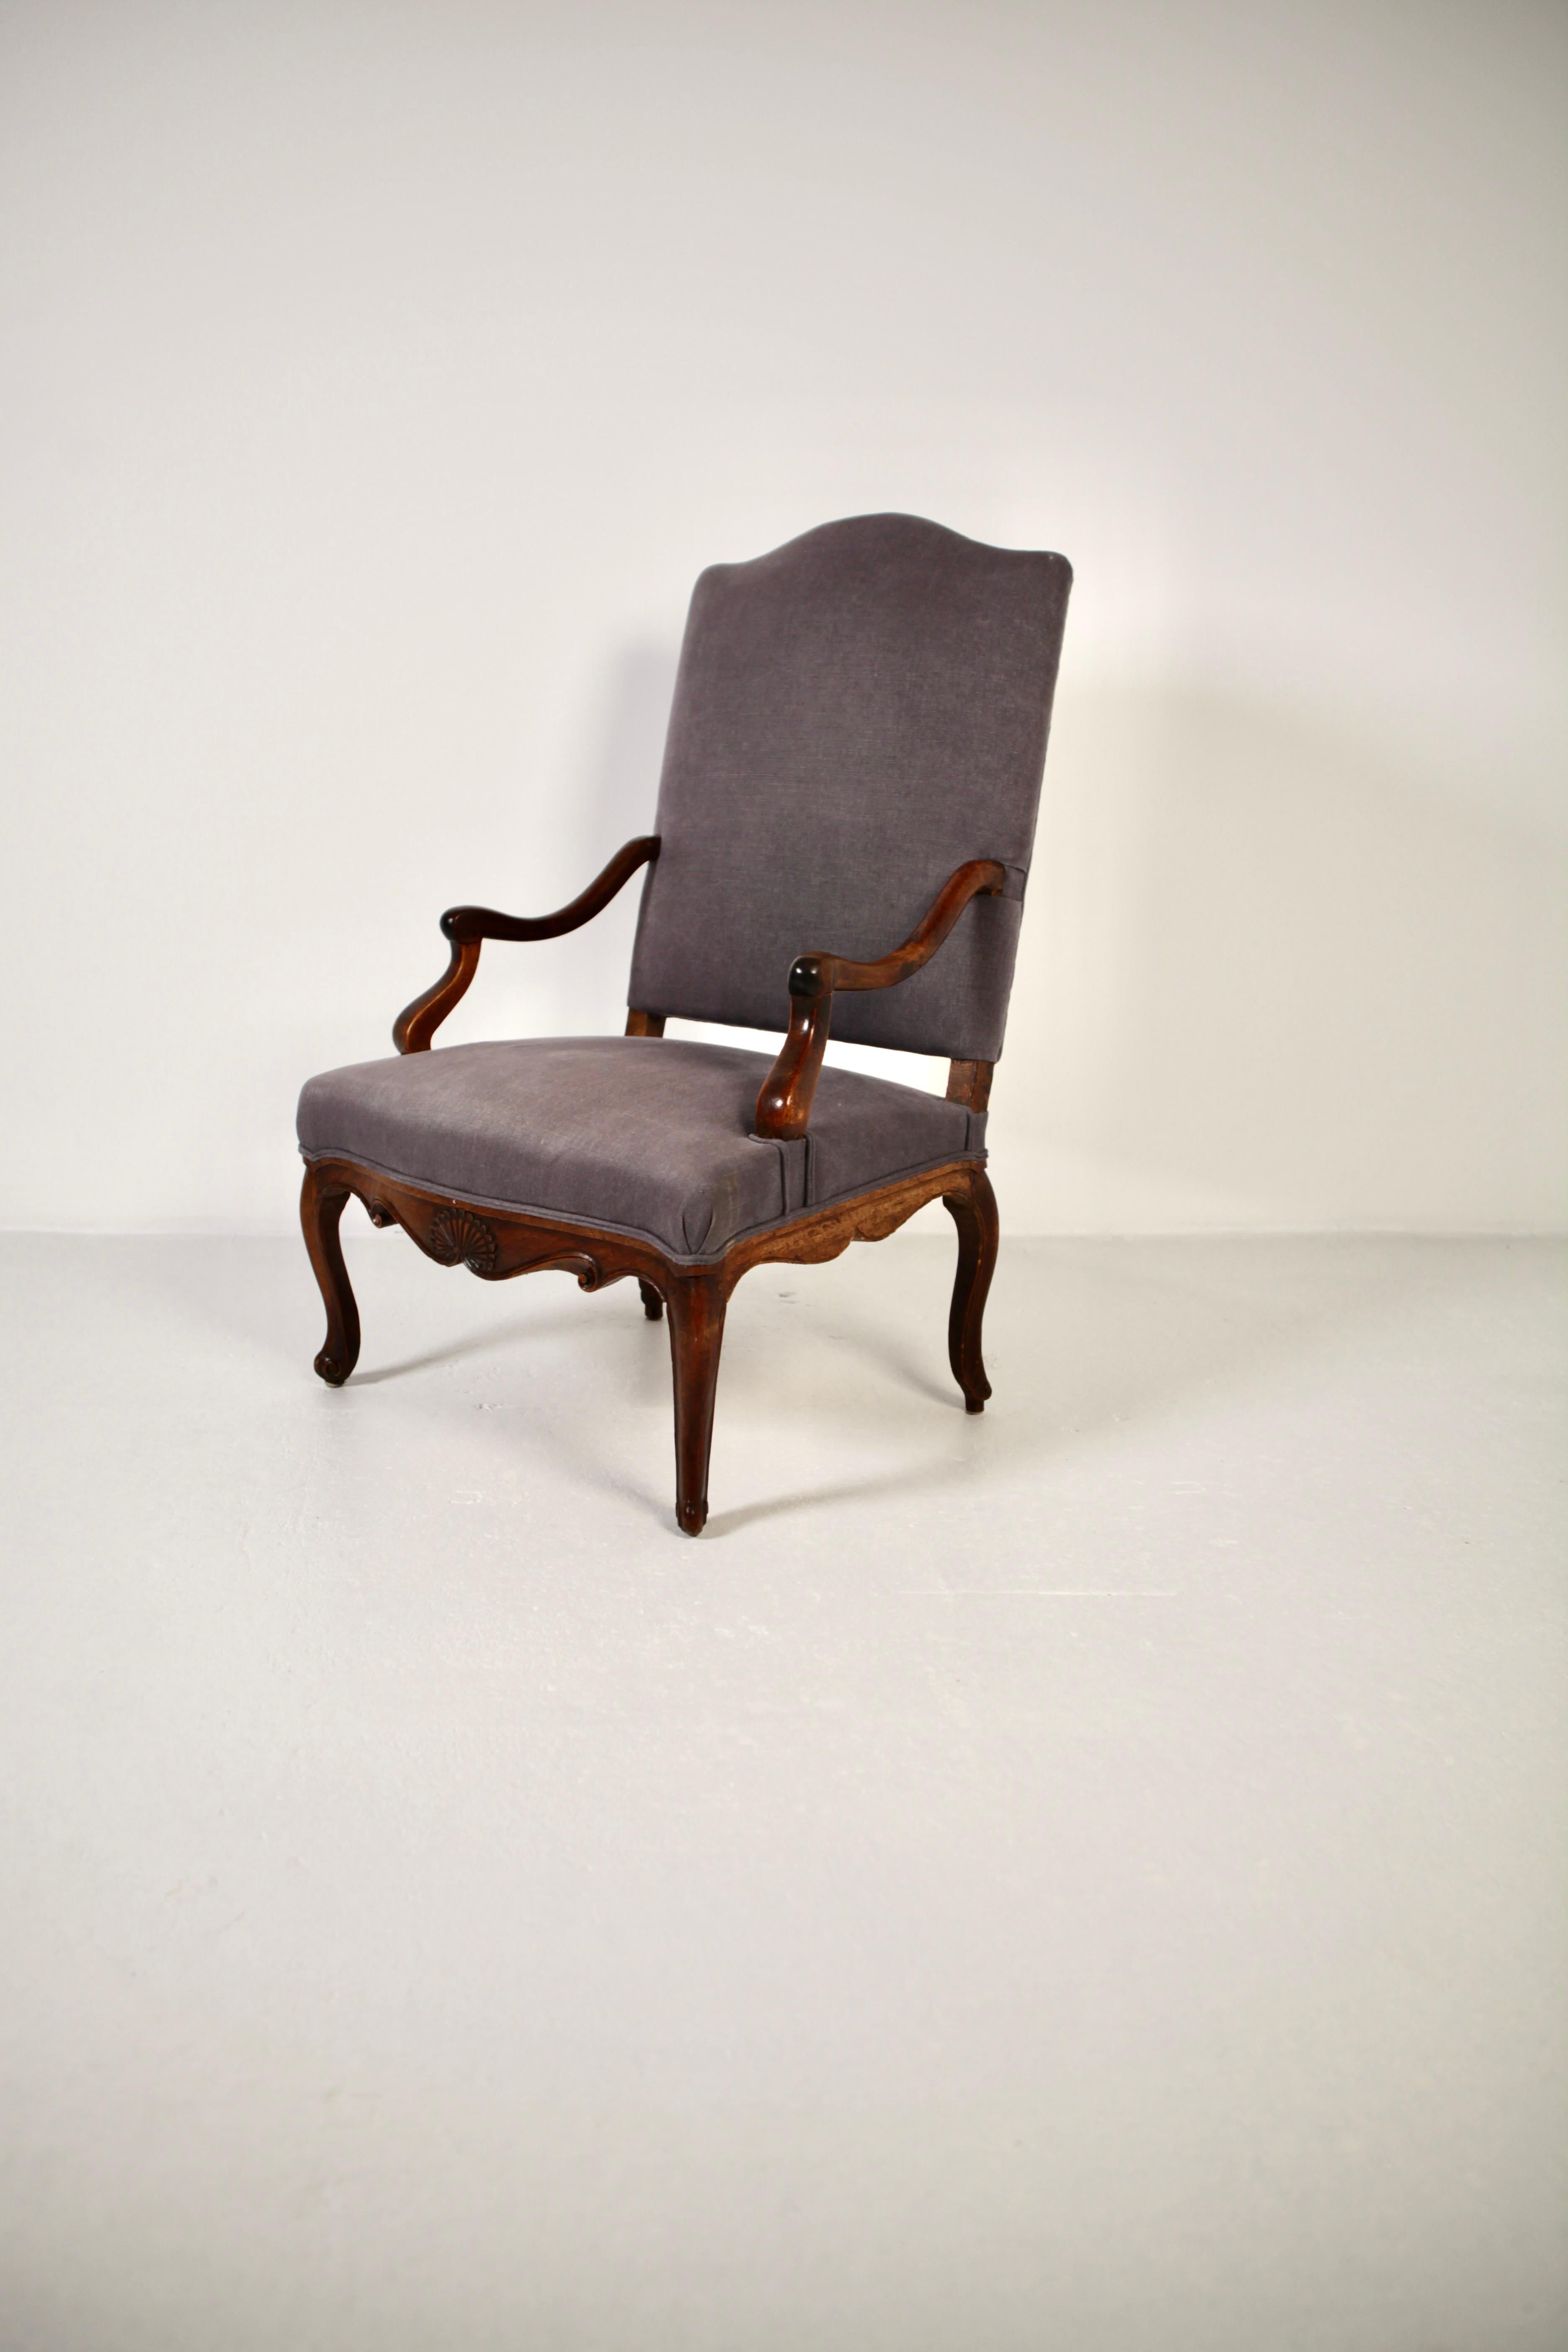 French Large Louis XV Regence Armchair in Walnut & Linen, 18th Century For Sale